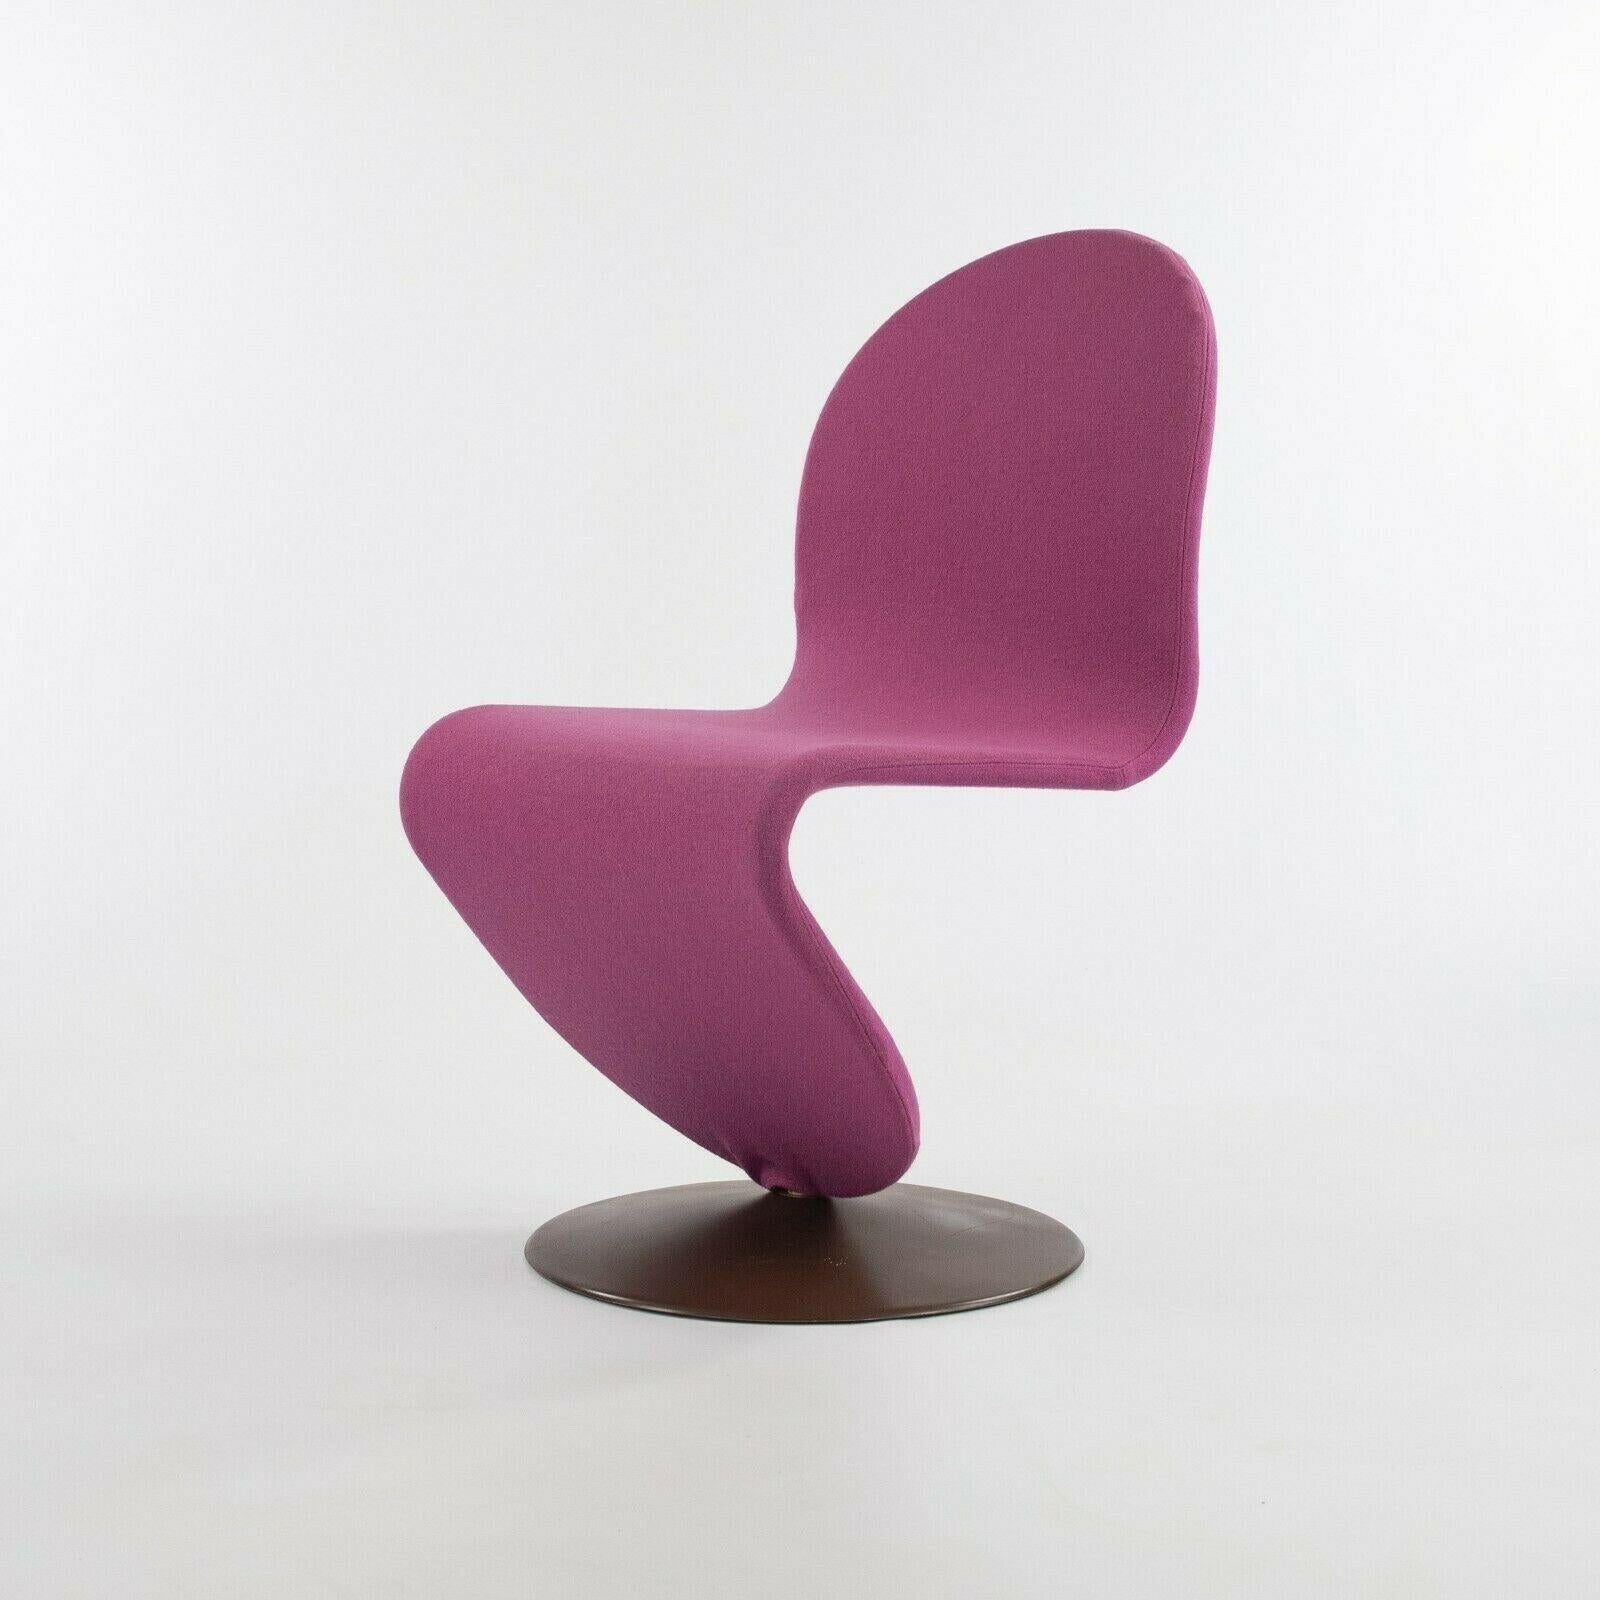 Listed for sale is an original 1-2-3 dining / side chair, designed by Verner Panton and produced by Fritz Hansen. This is a classic example of Panton's work. Condition overall is very good for seemingly original condition. If desired, the upholstery